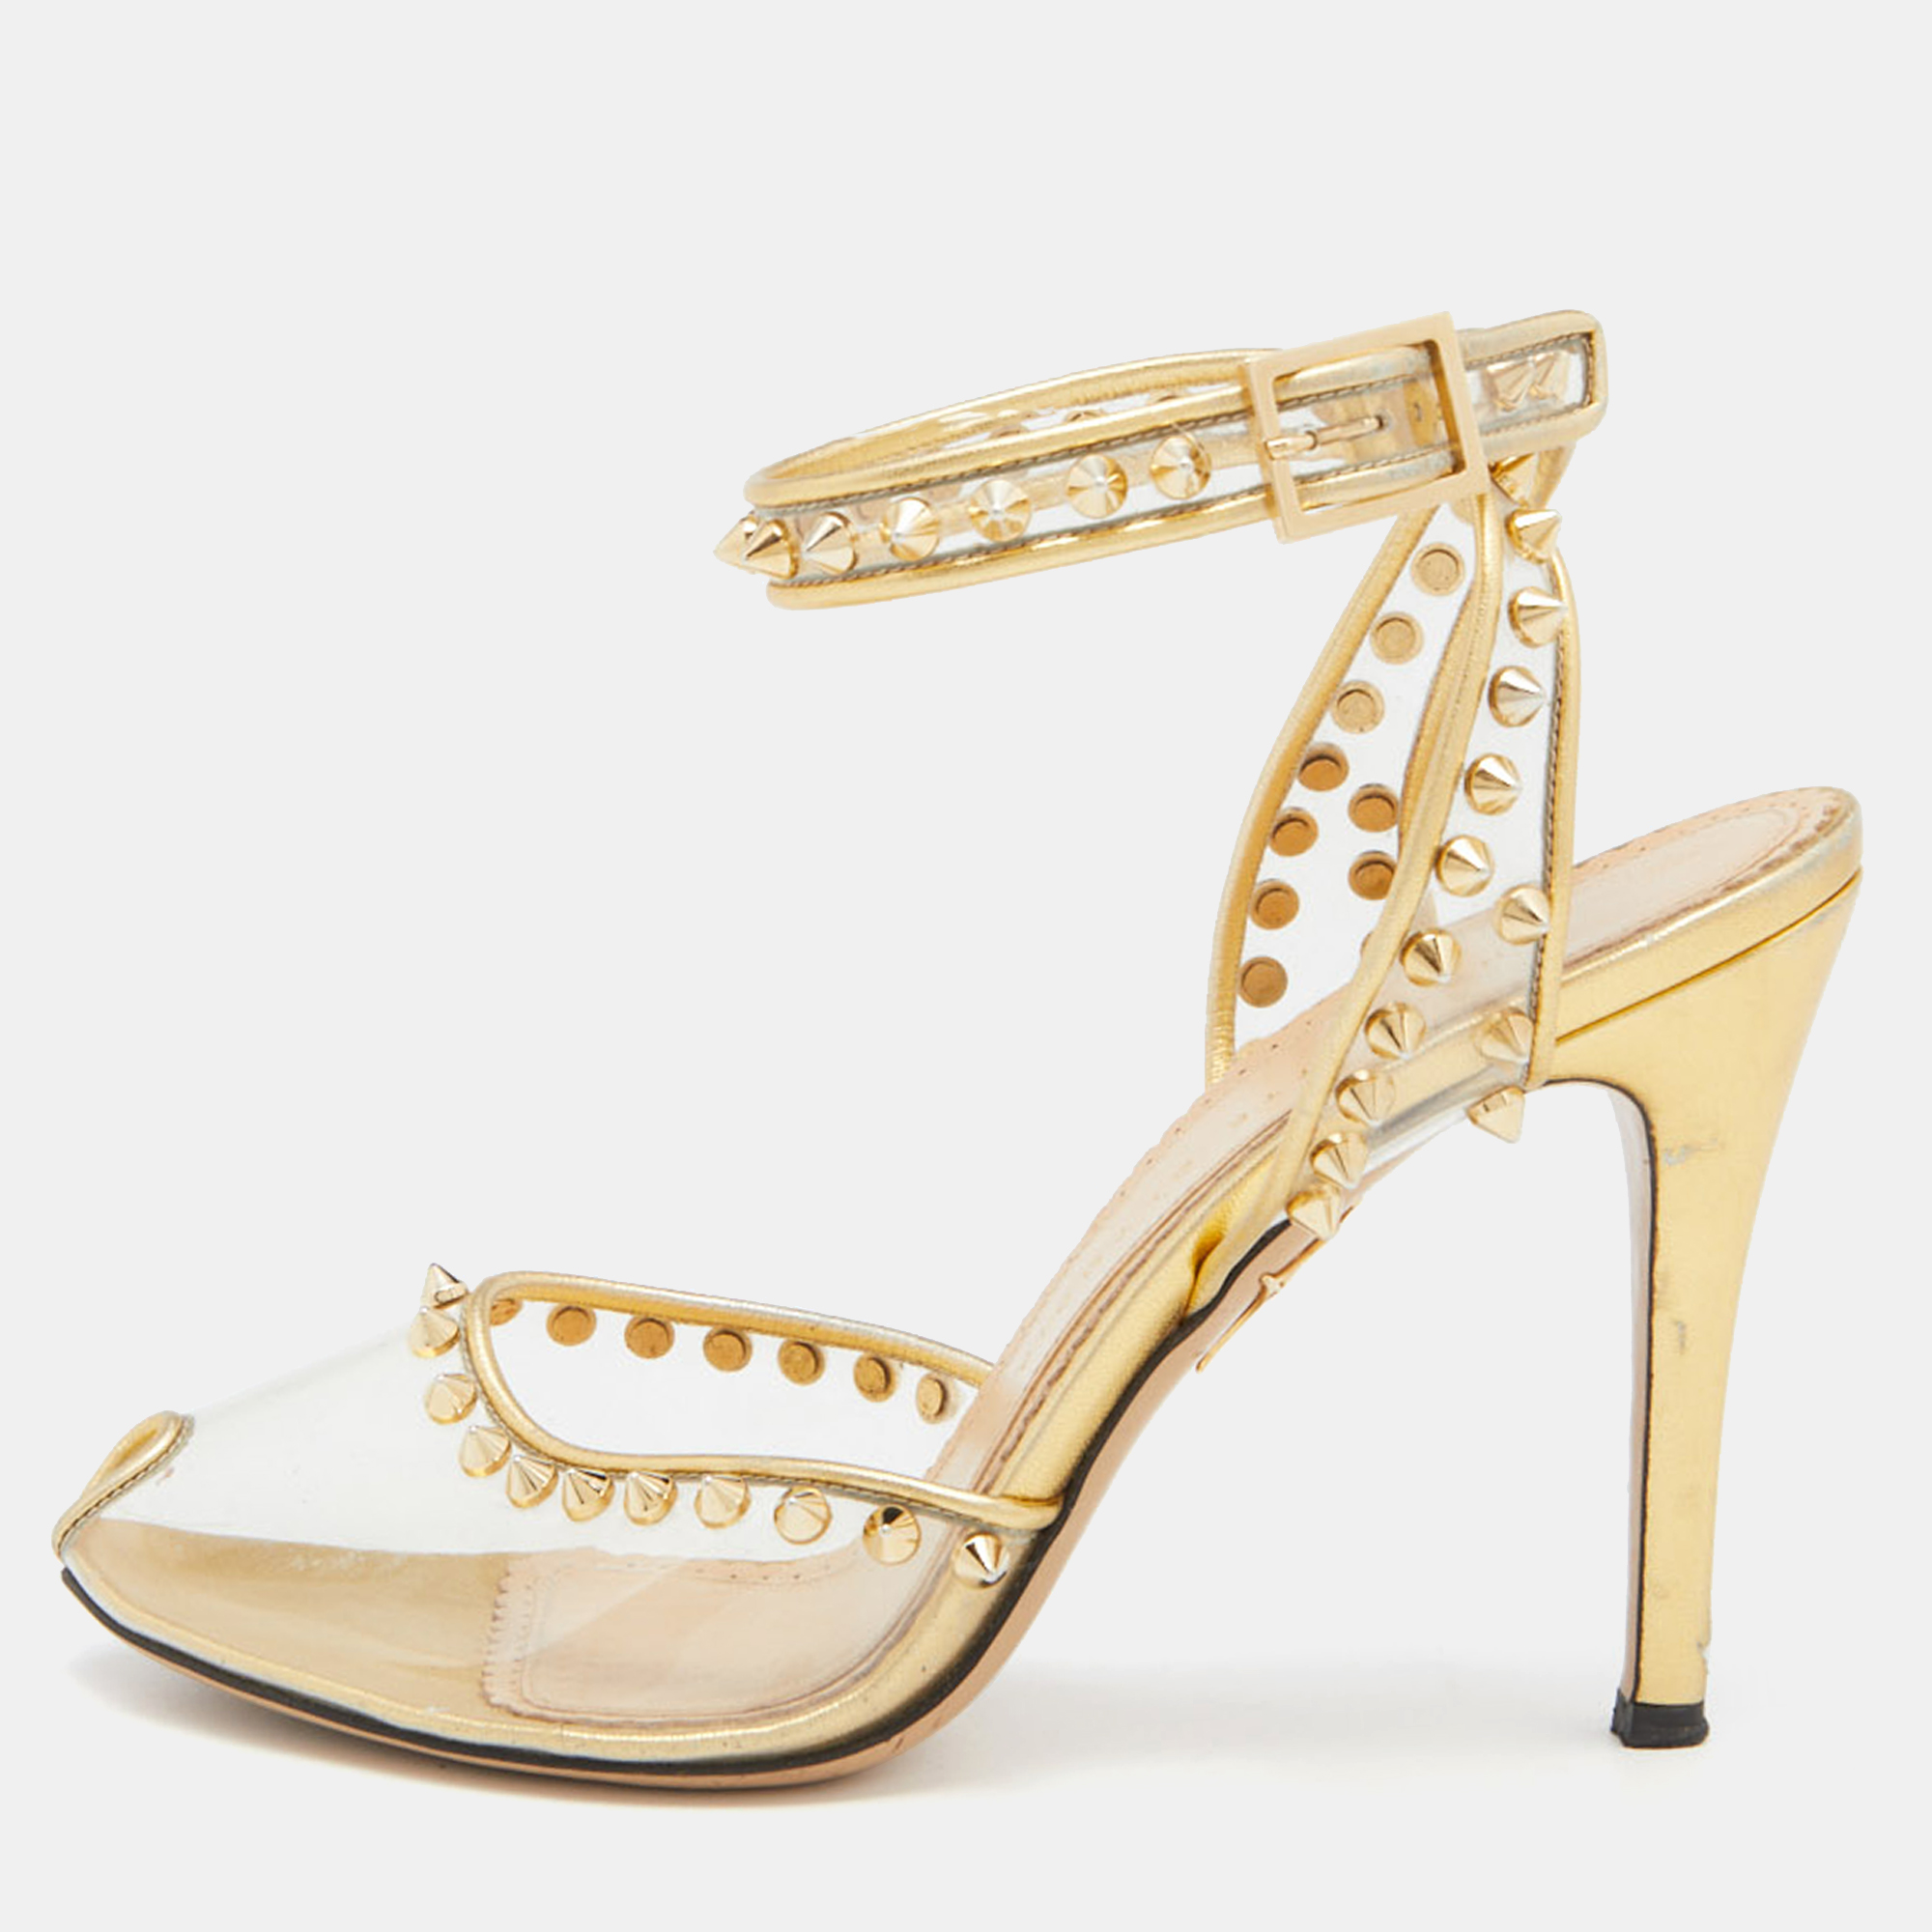 Pre-owned Charlotte Olympia Gold Studded Pvc And Leather Soho Peep Toe Sandals Size 38